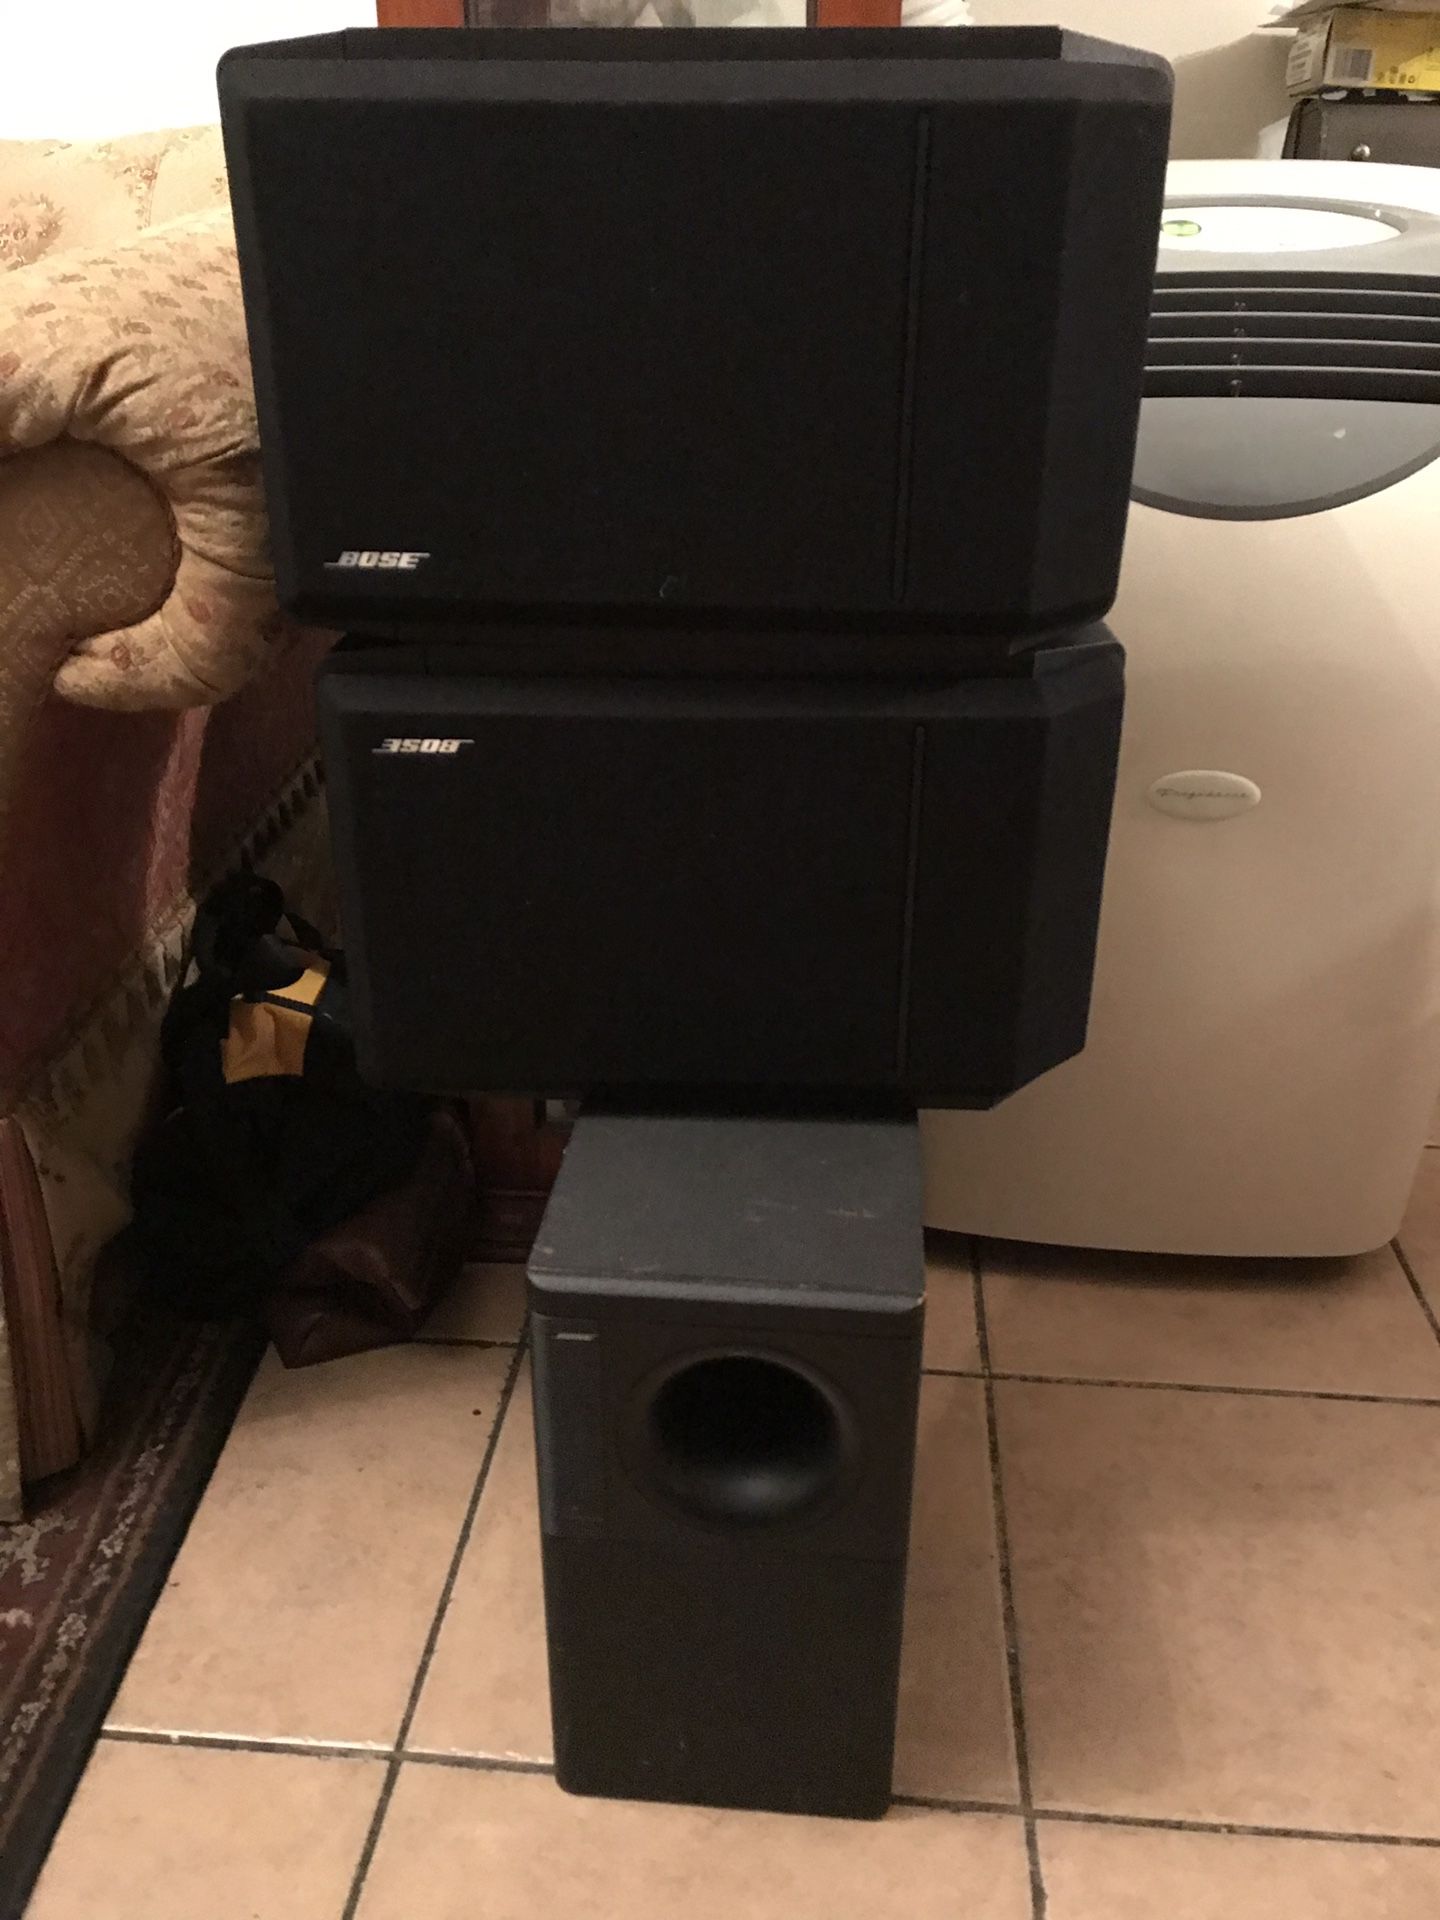 Bose 301 series IV speakers and bose subwoofer